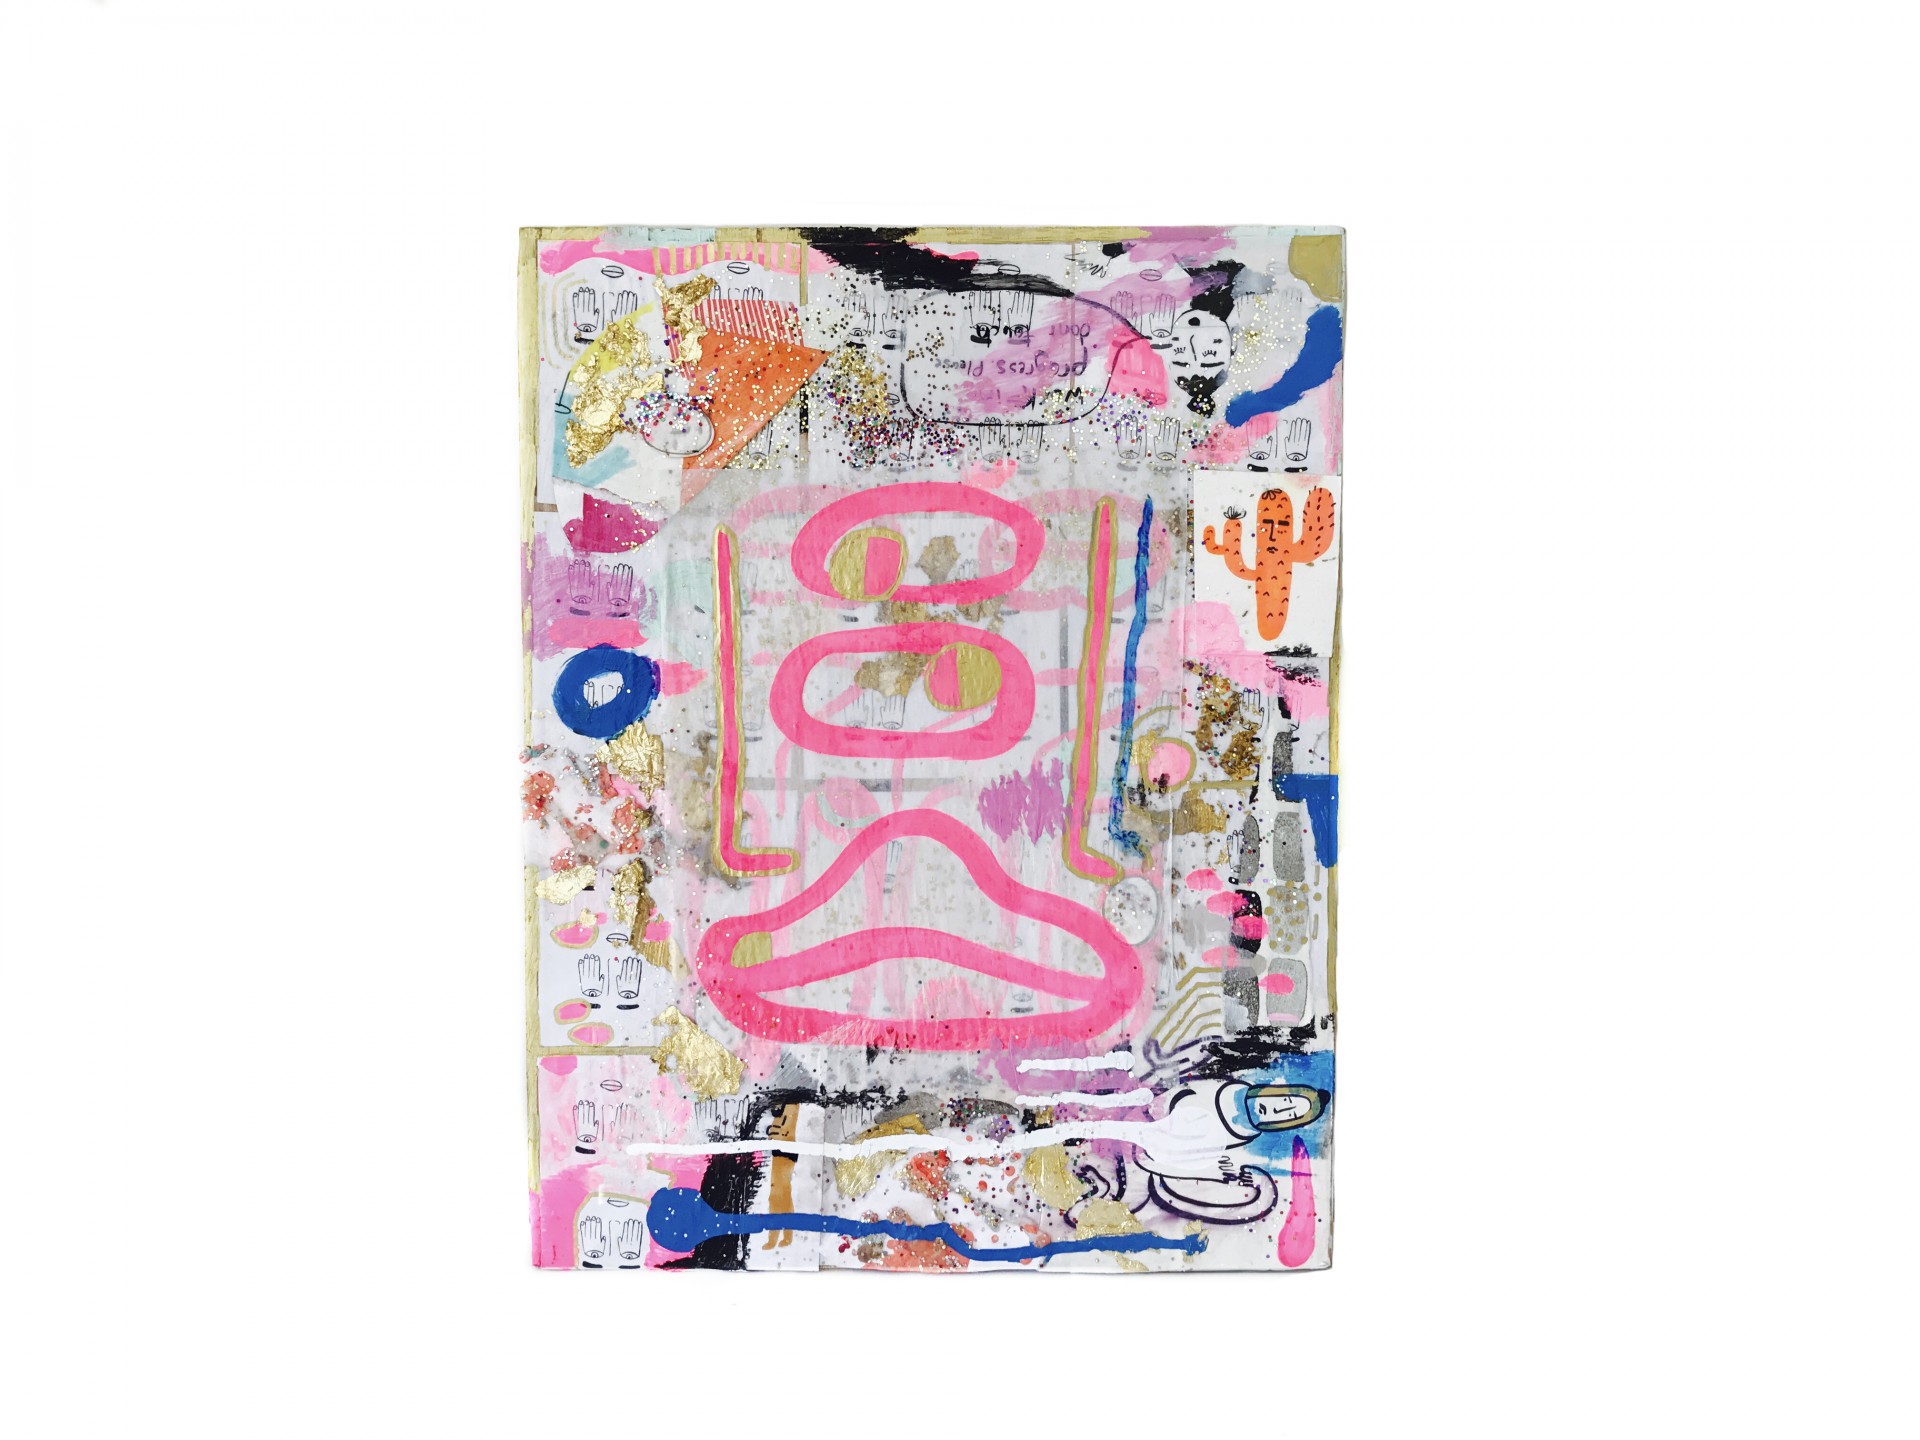 Rectangular painting with abstract designs, collaged materials and glitter. Image of face with one eye drawn in pink. 